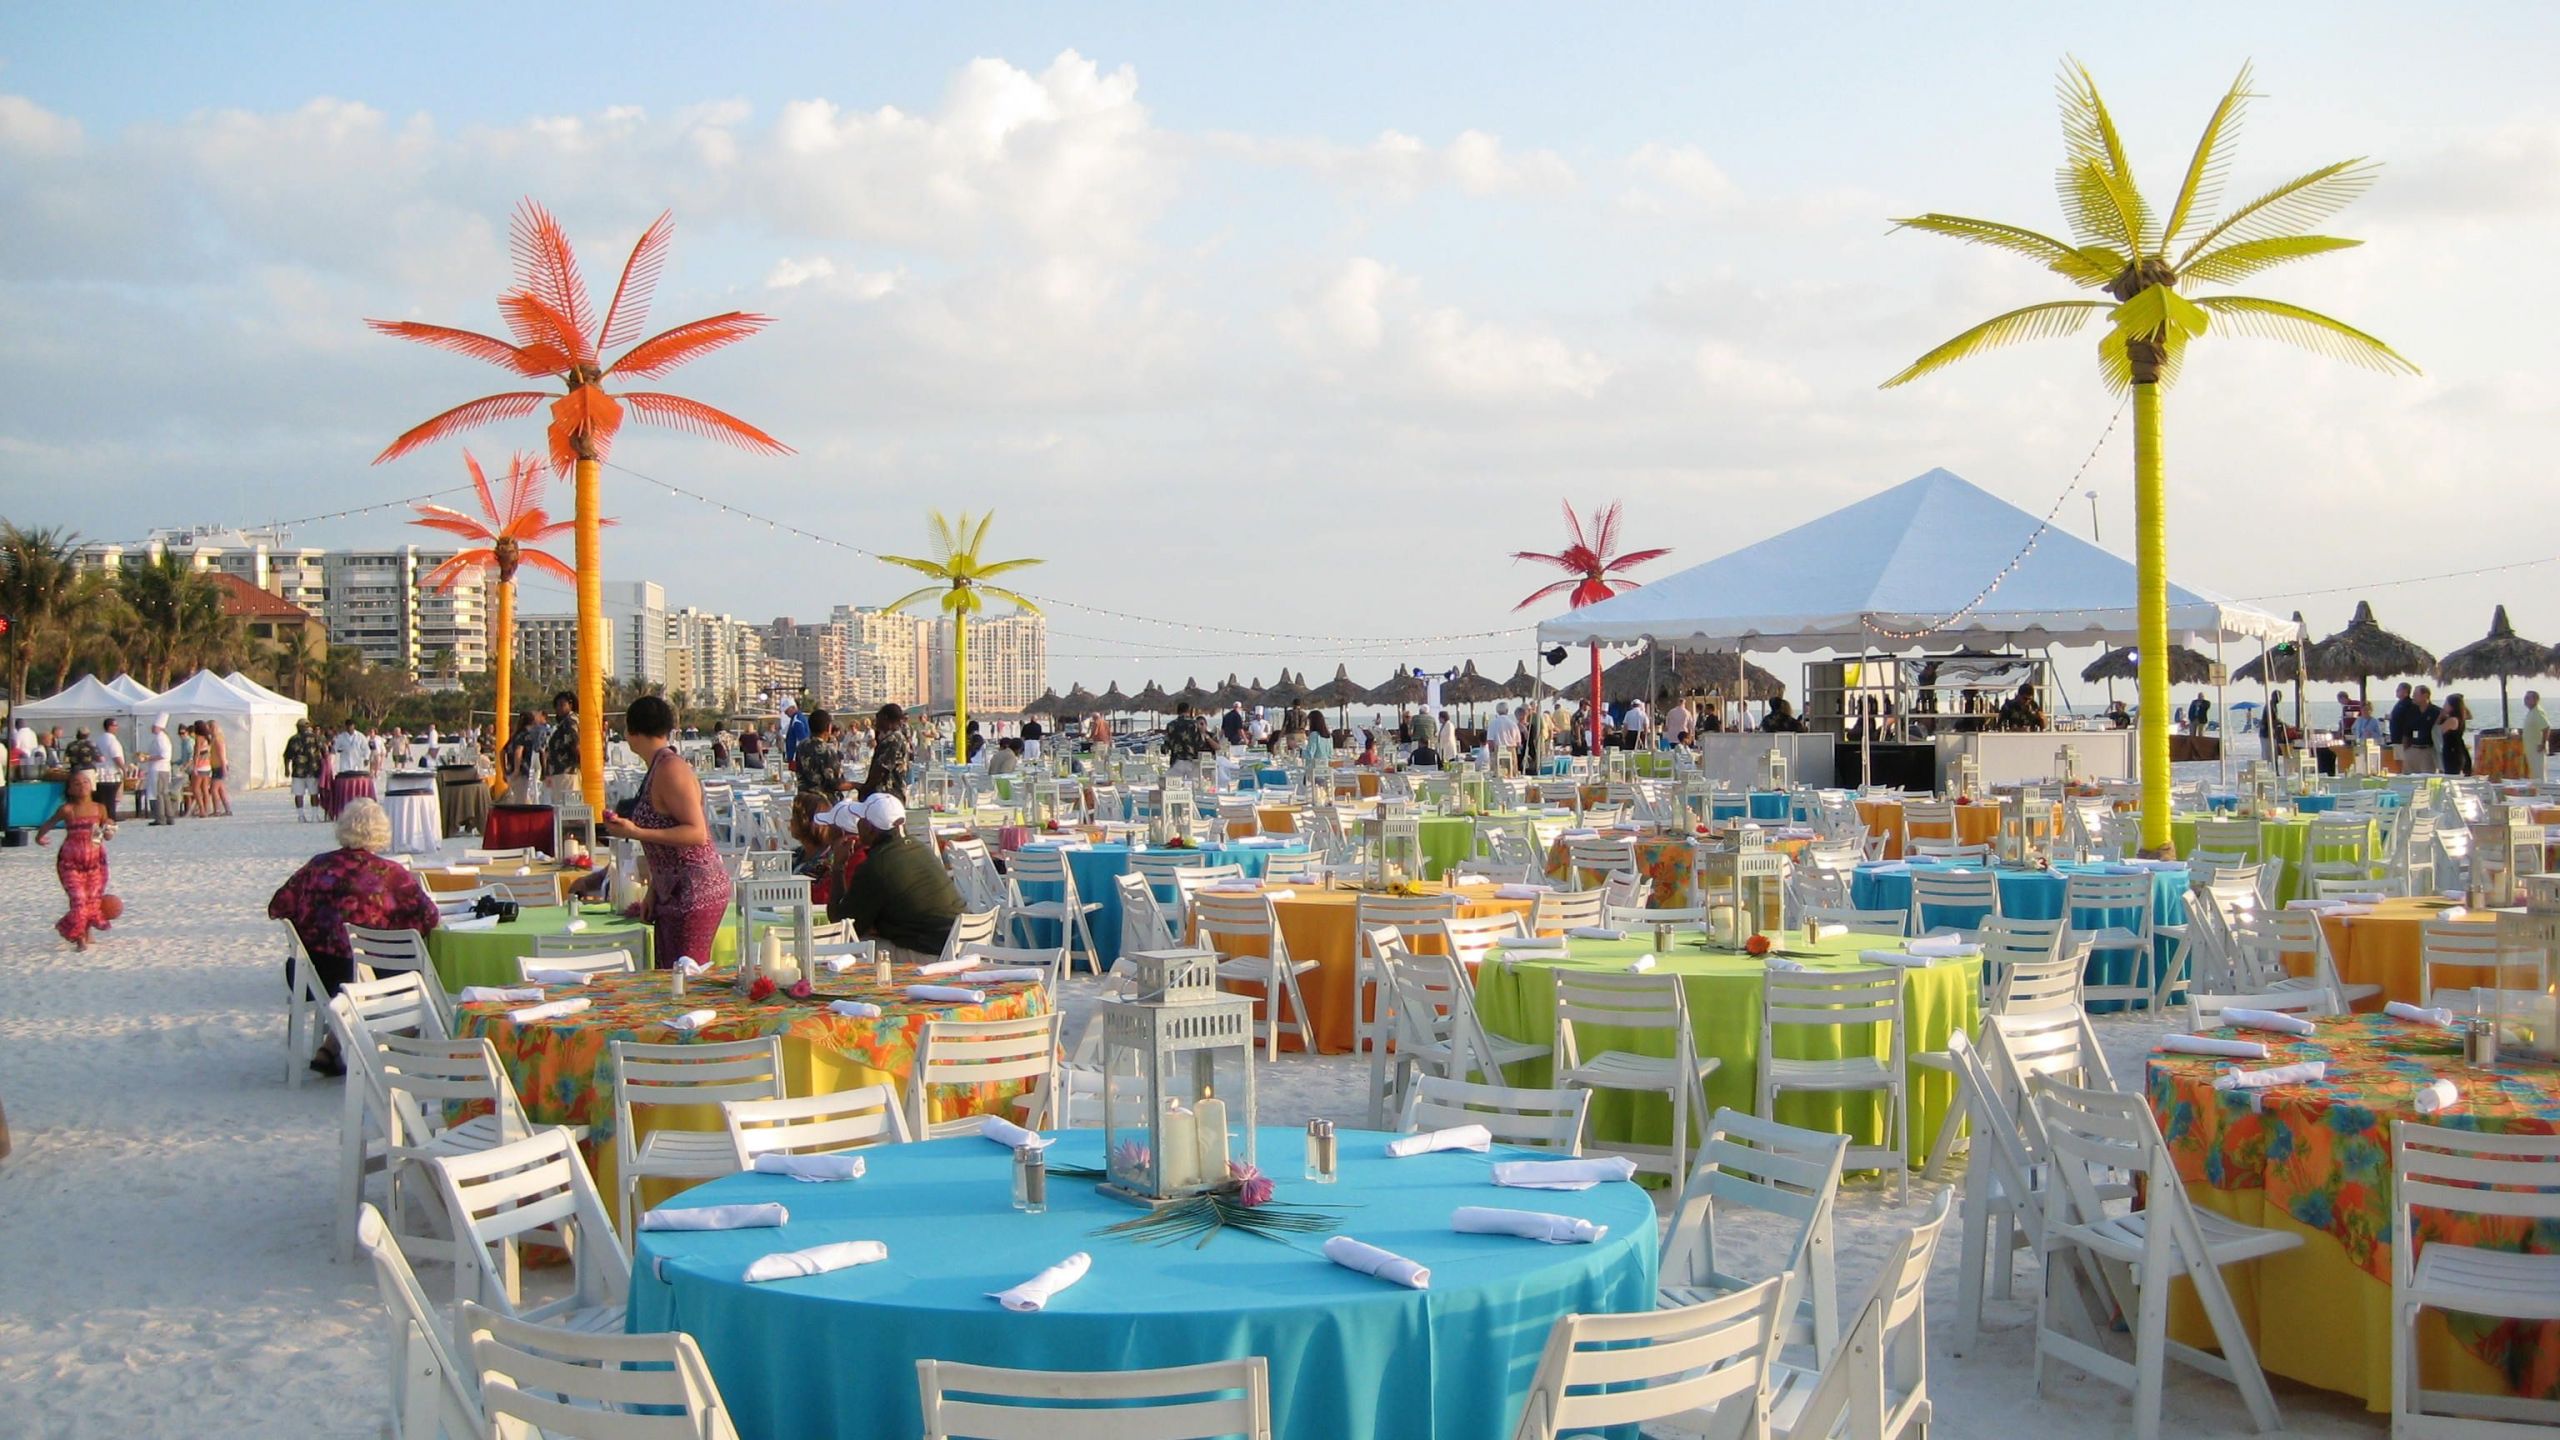 Corporate Beach Party Ideas
 Outdoor Caribbean Beach Themed Event by Wizard Connection